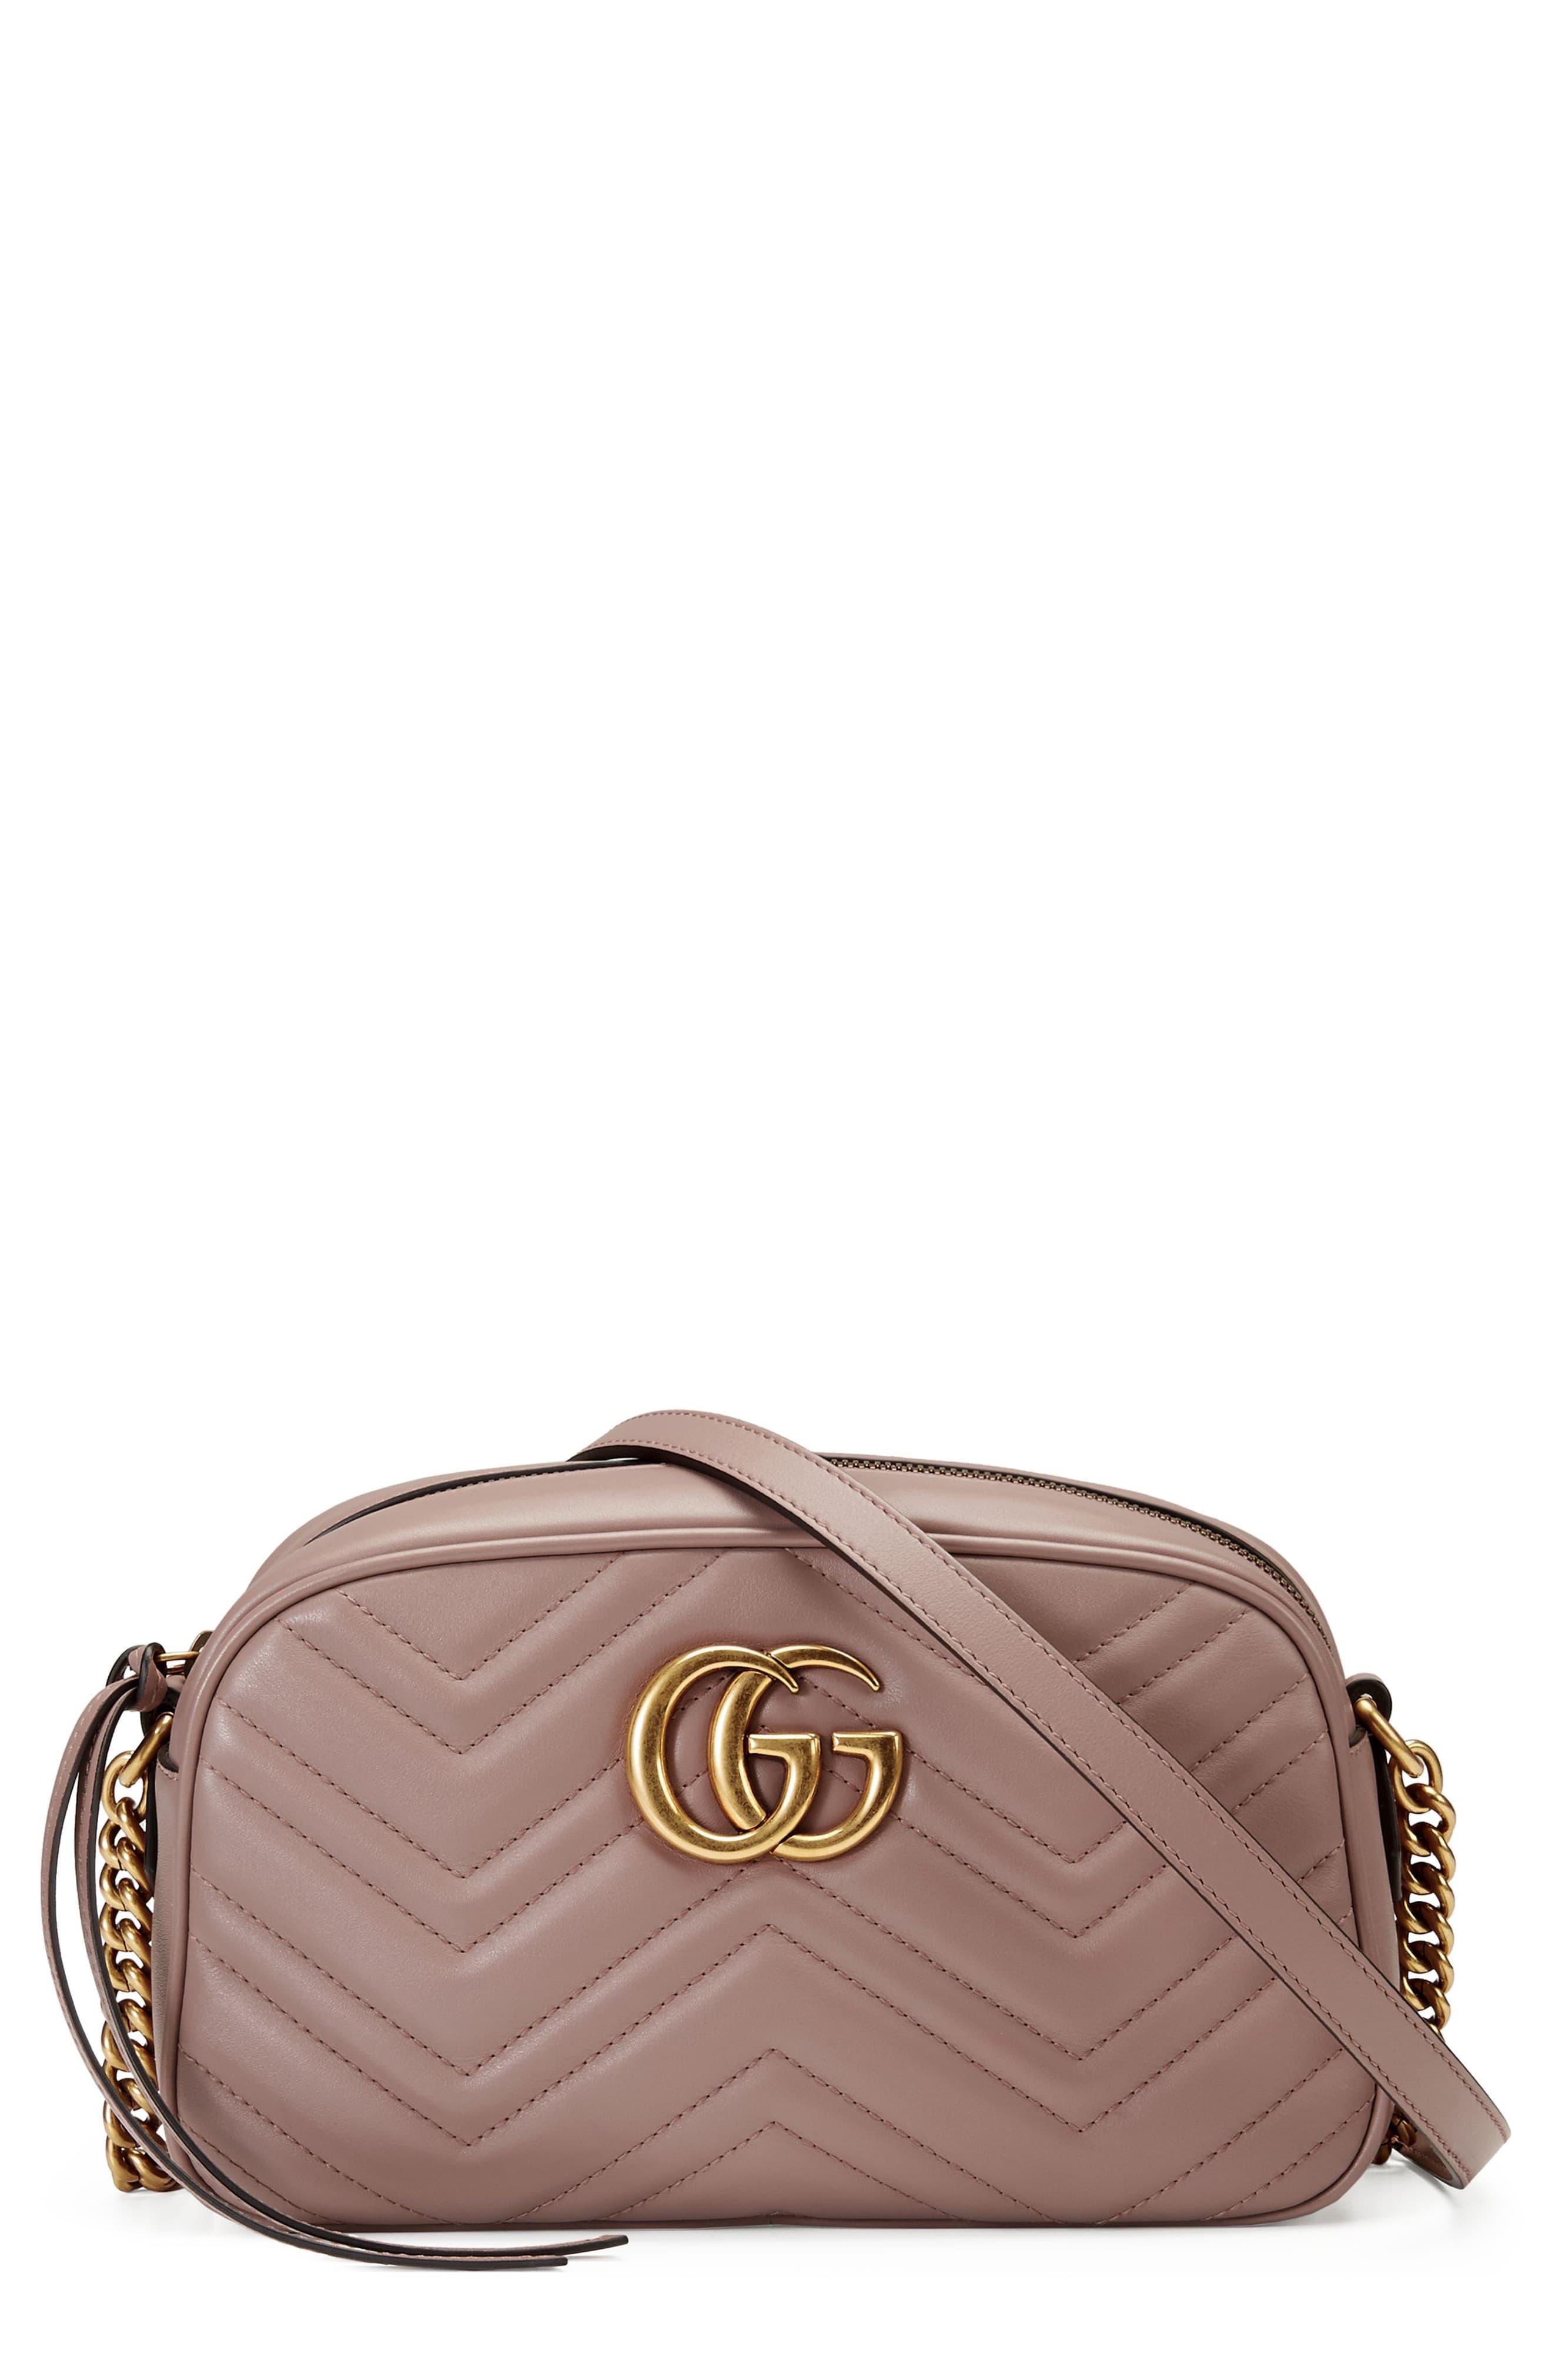 Gucci Small Gg Marmont 2.0 Matelassé Leather Camera Bag in Pink - Lyst